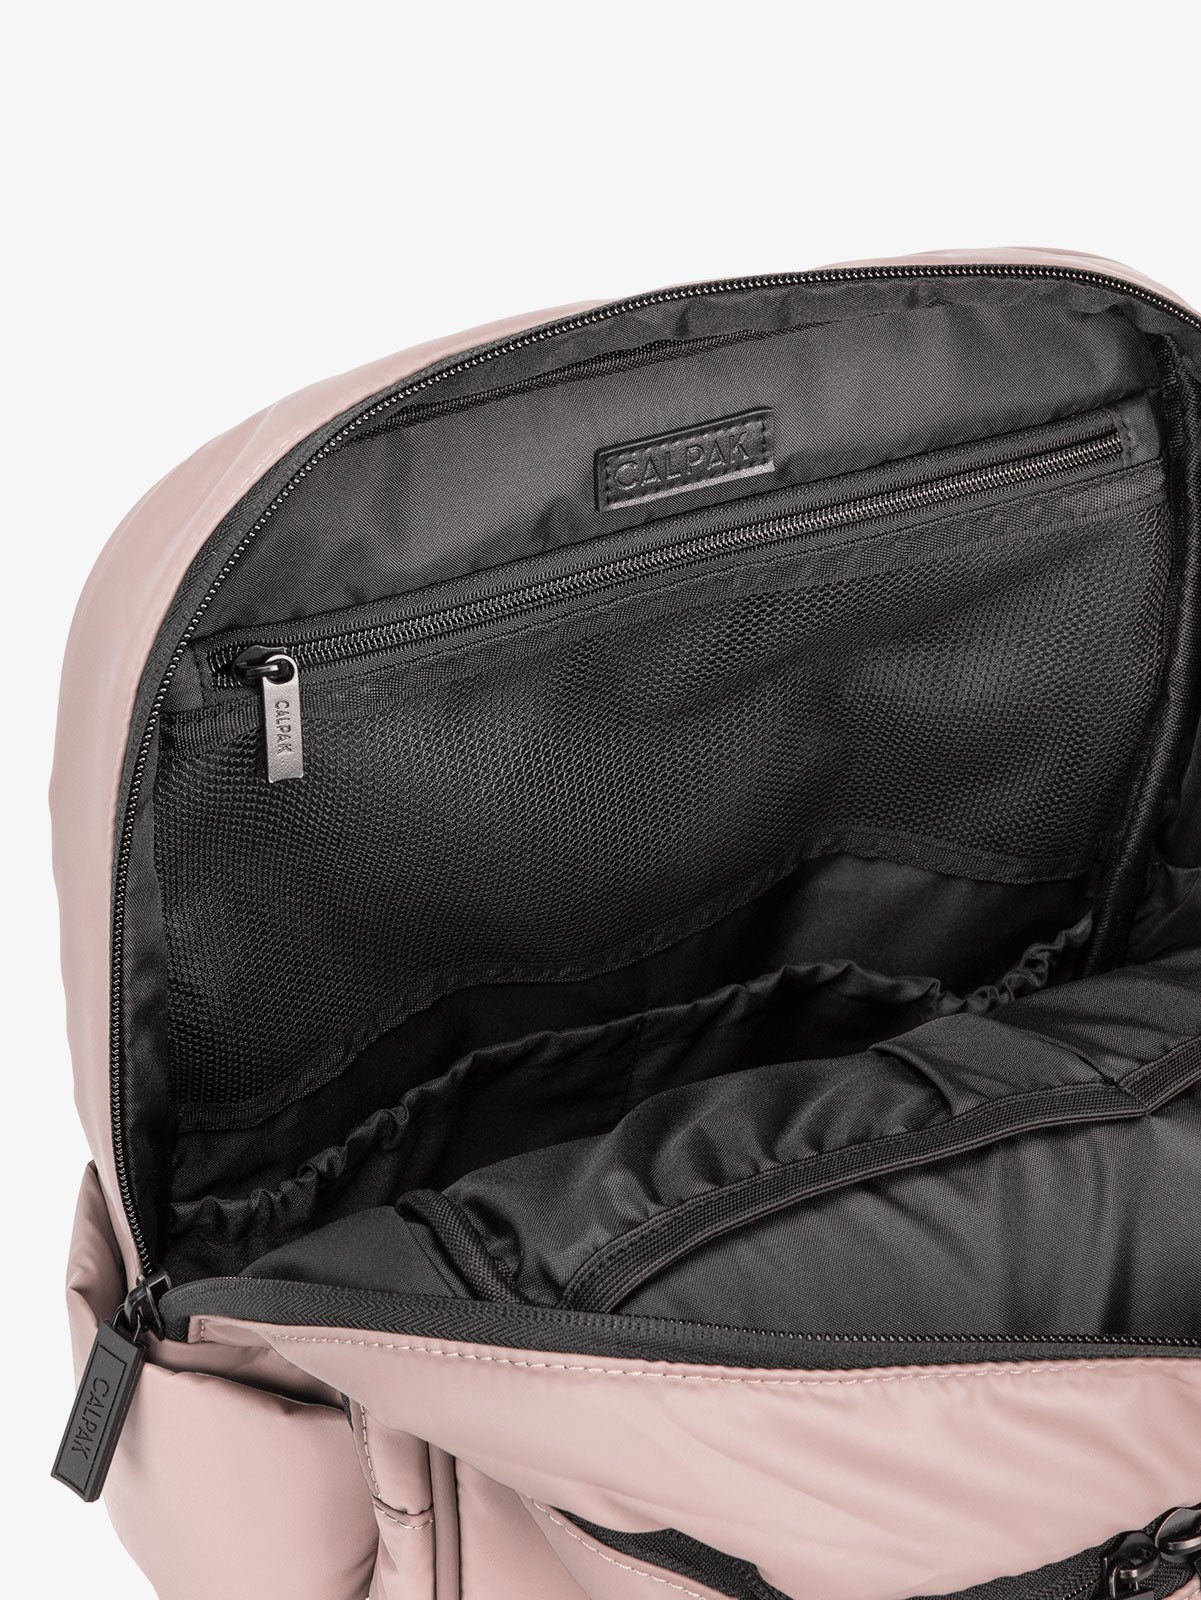 Close up of main compartment of CALPAK laptop backpack with multiple interior pockets in pink rose quartz